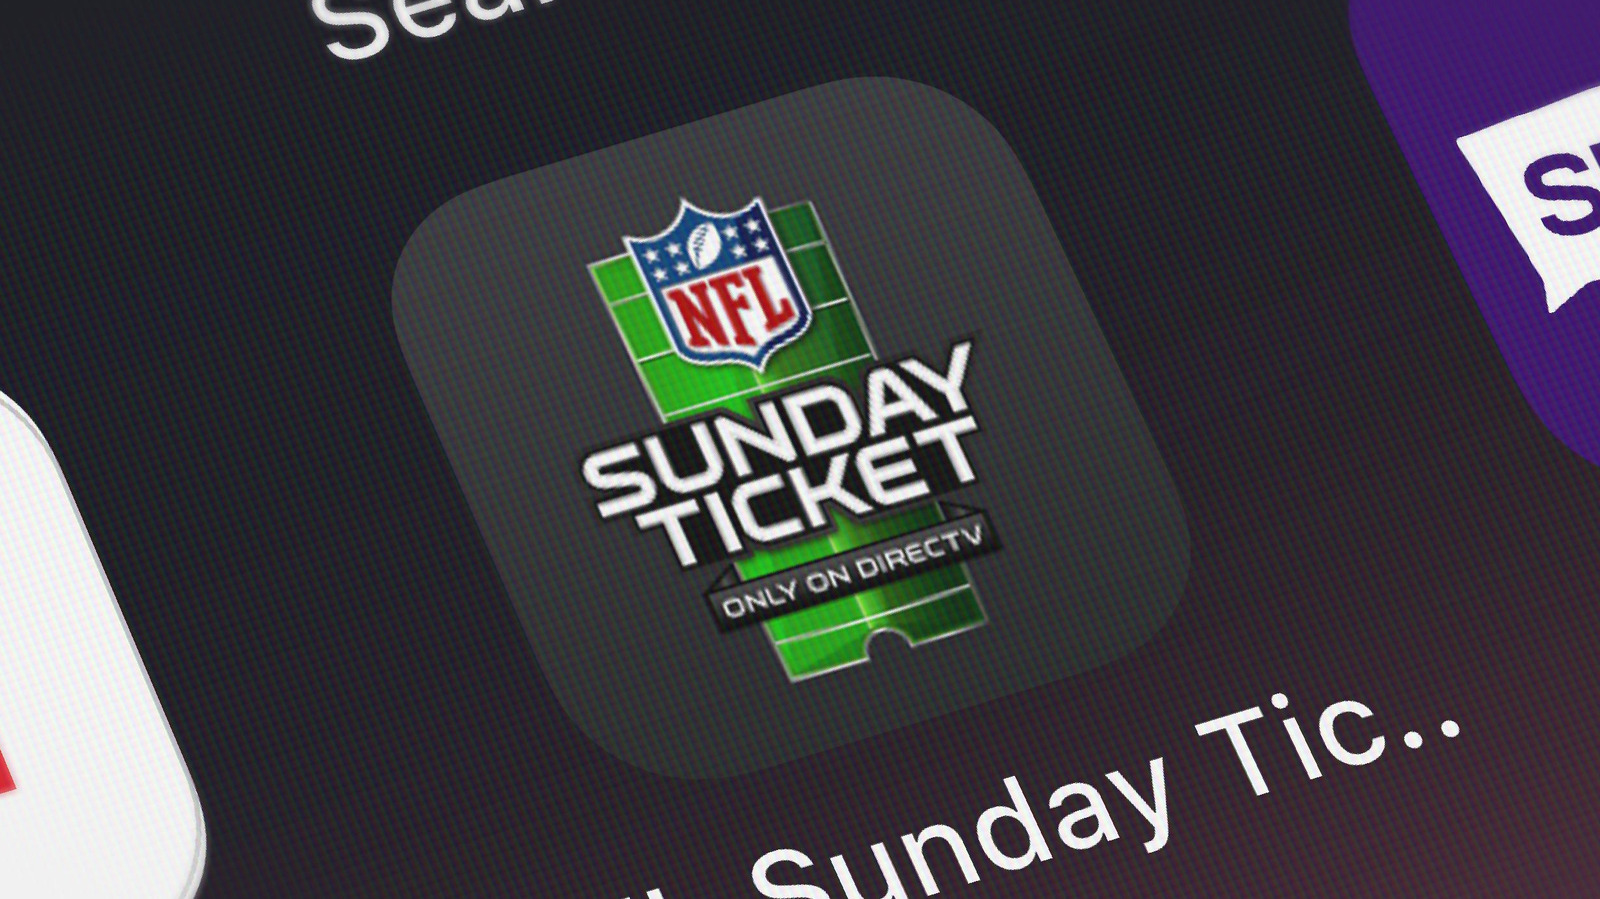 nfl sunday package without directv